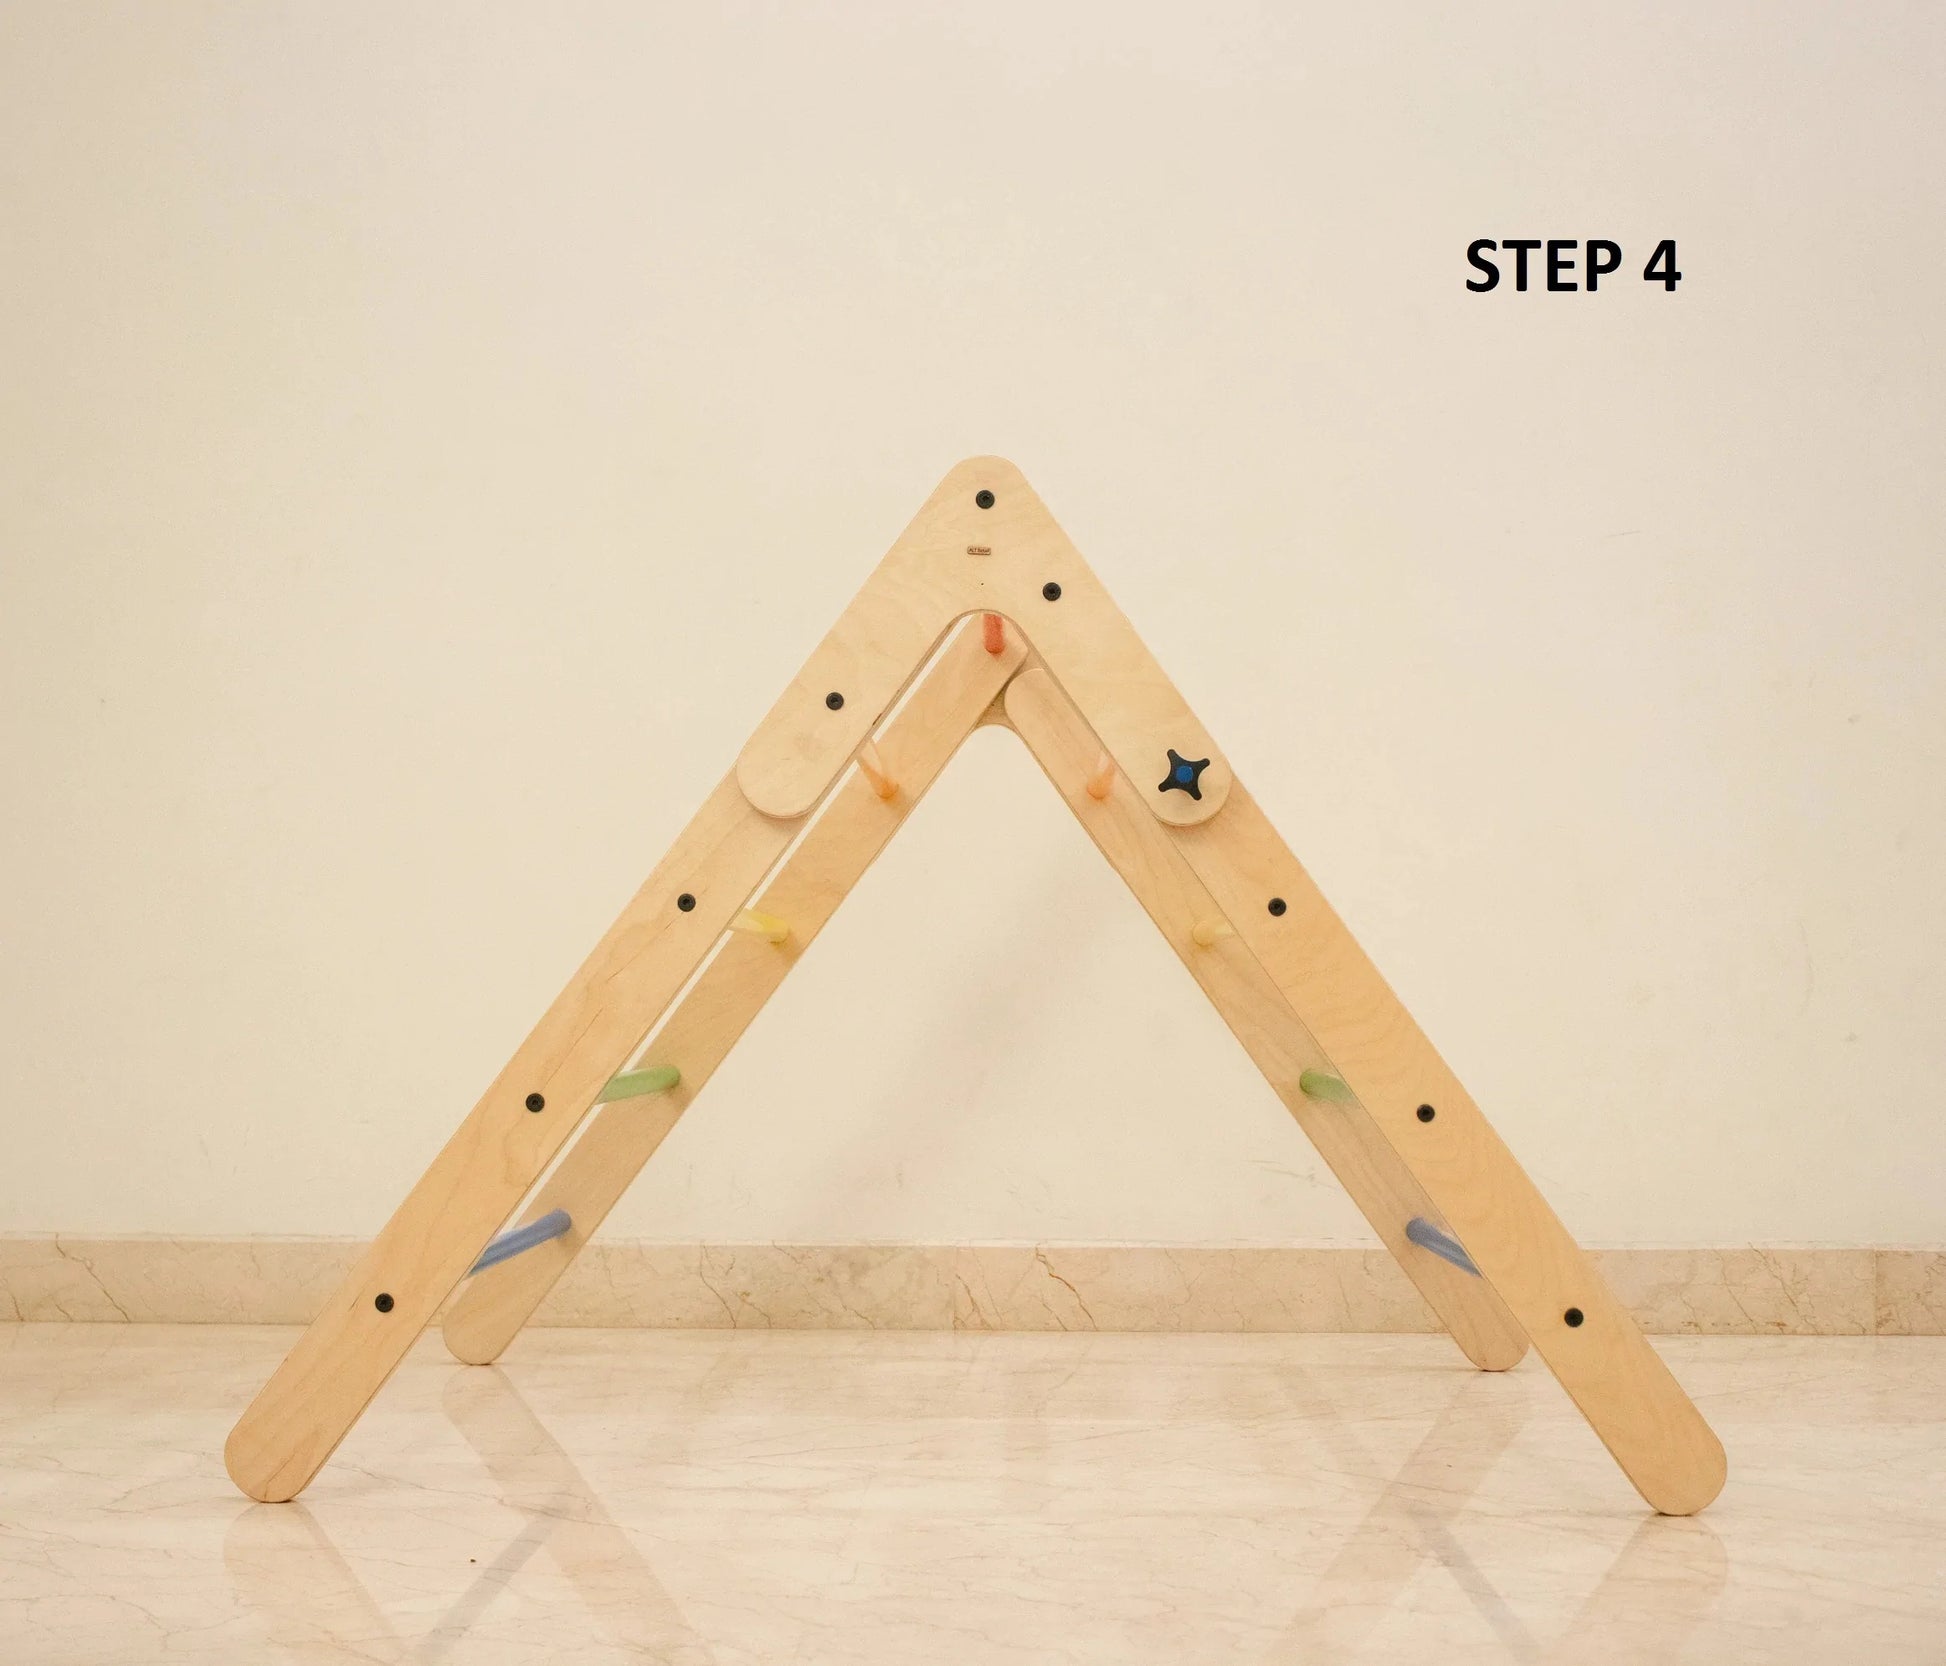 Buy The Climbing & Pikler Triangle with Reversible Ramp - Step 4 - SkilloToys.com